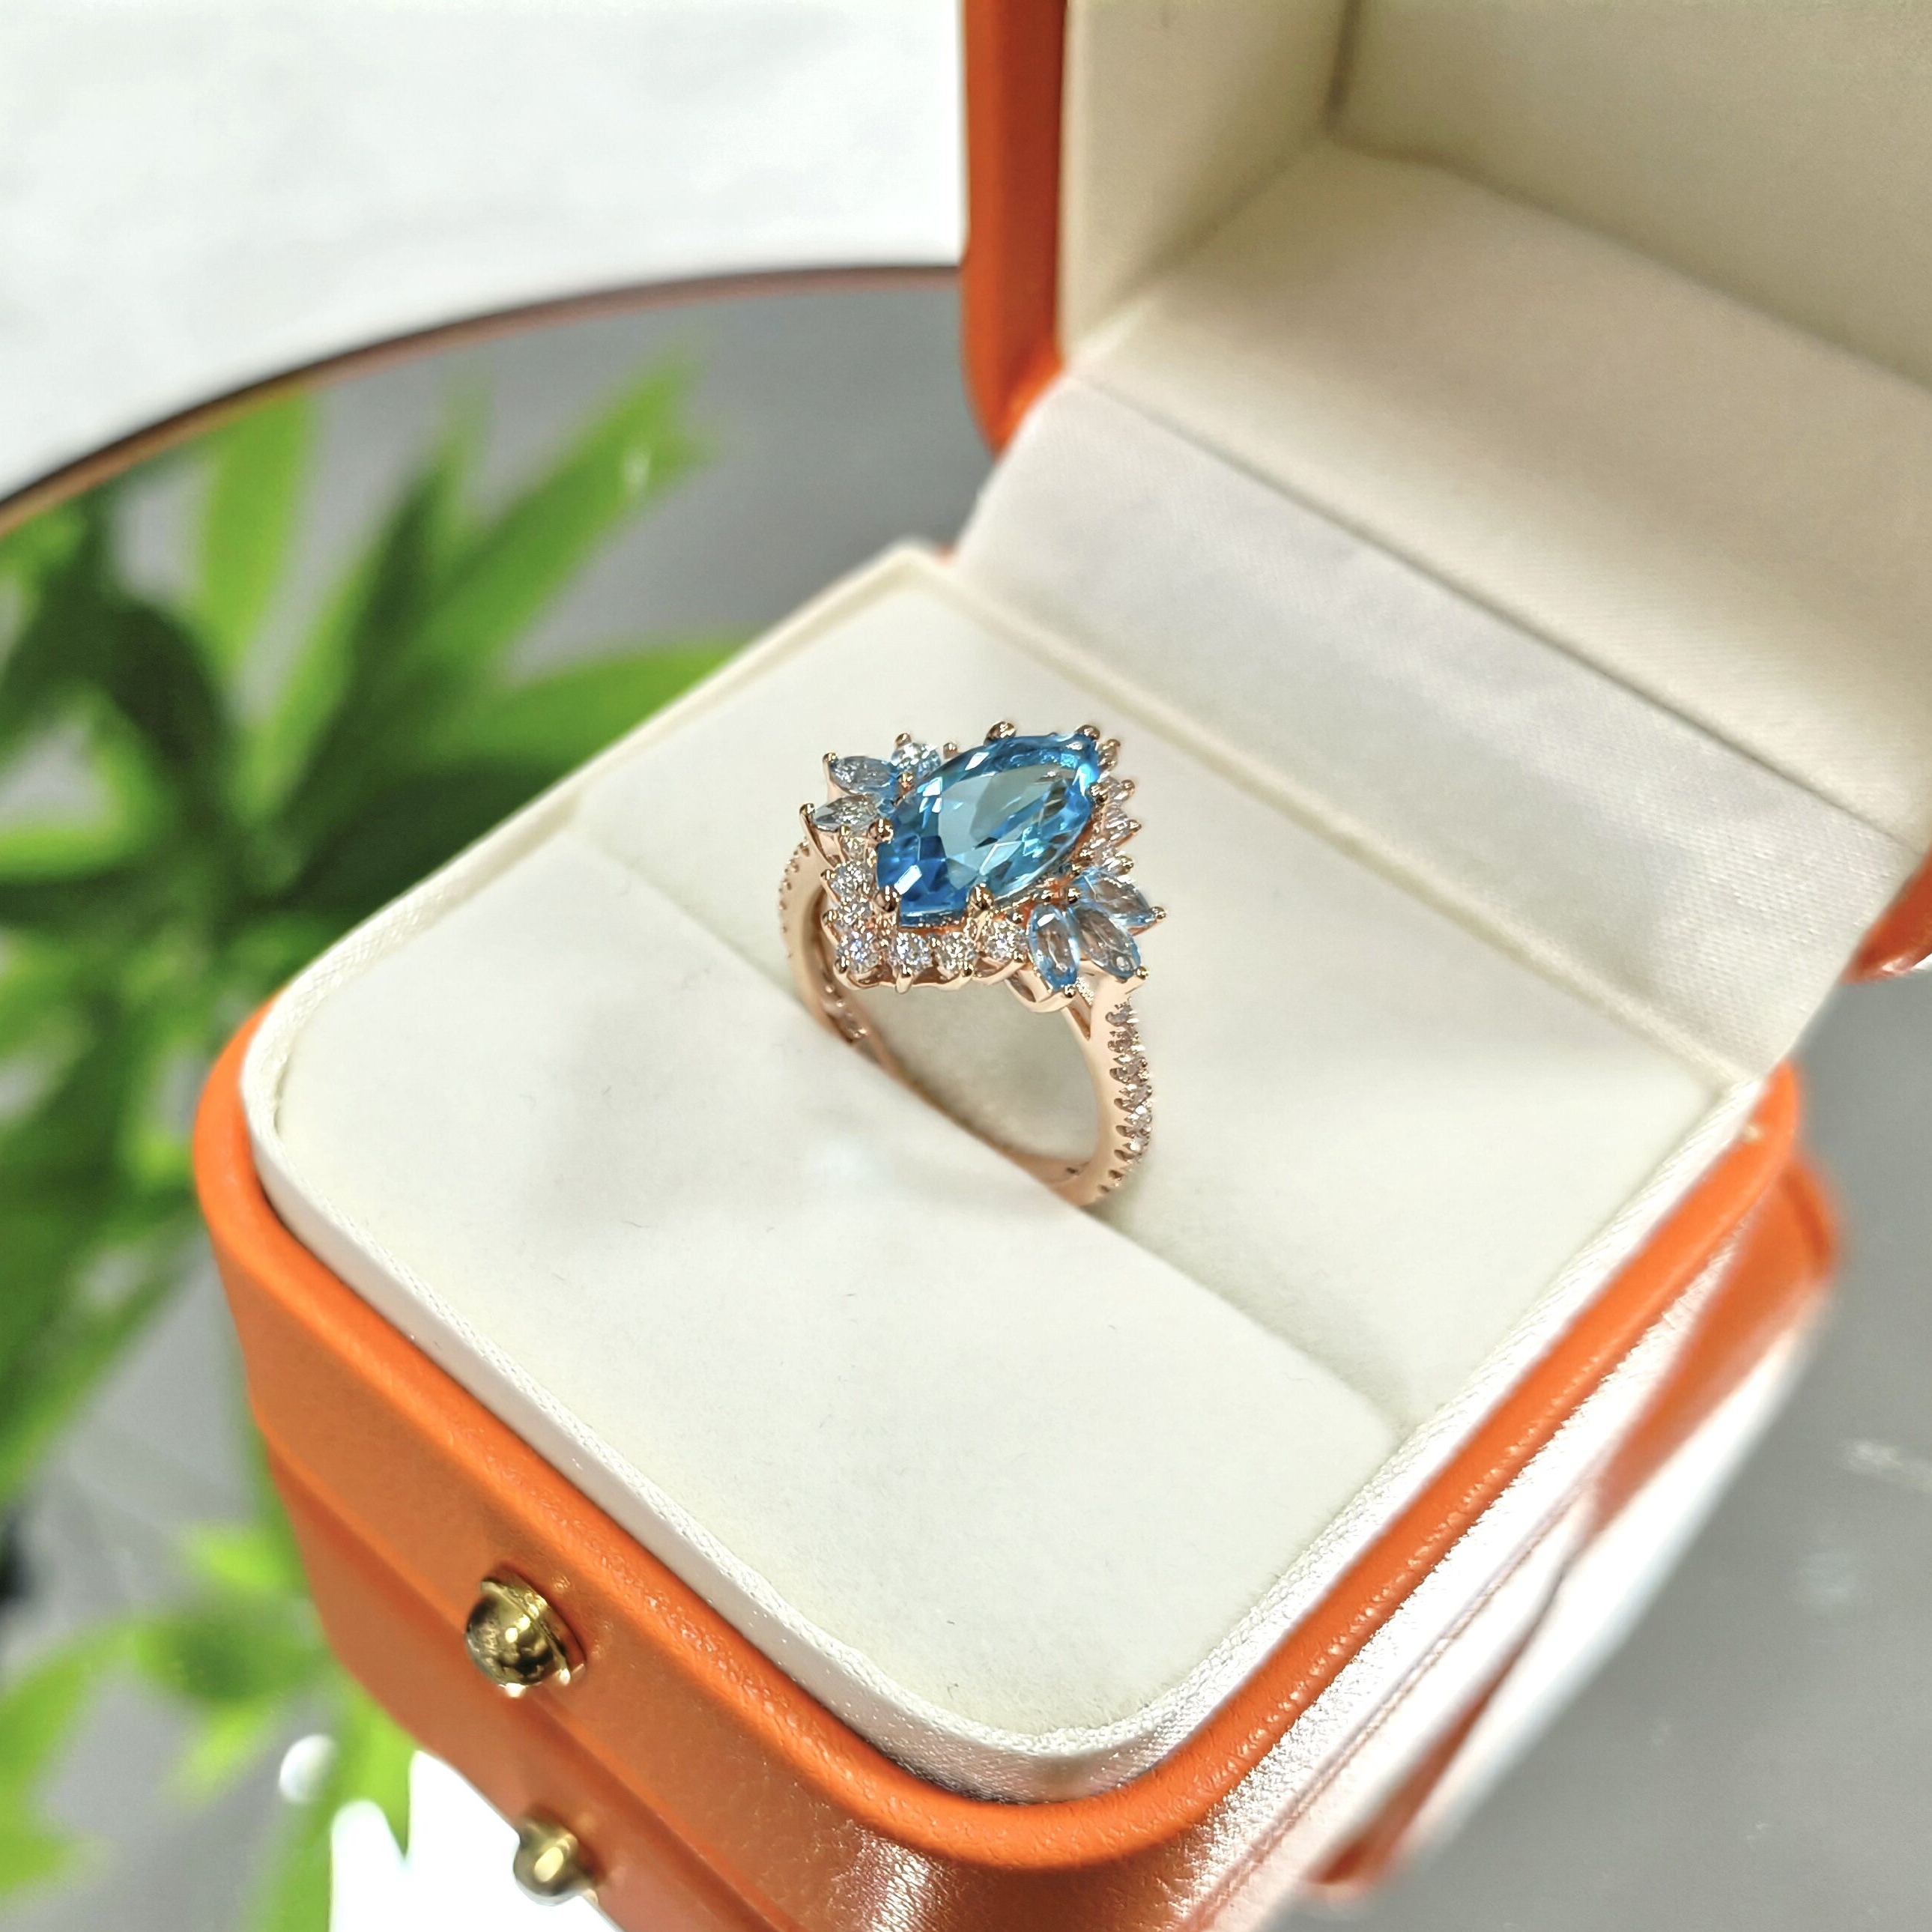 Blue Stone Ring Marquise Cut 2.5ct Swiss Blue Topaz Large Gemstone Solid Gold Ring for Women Girls